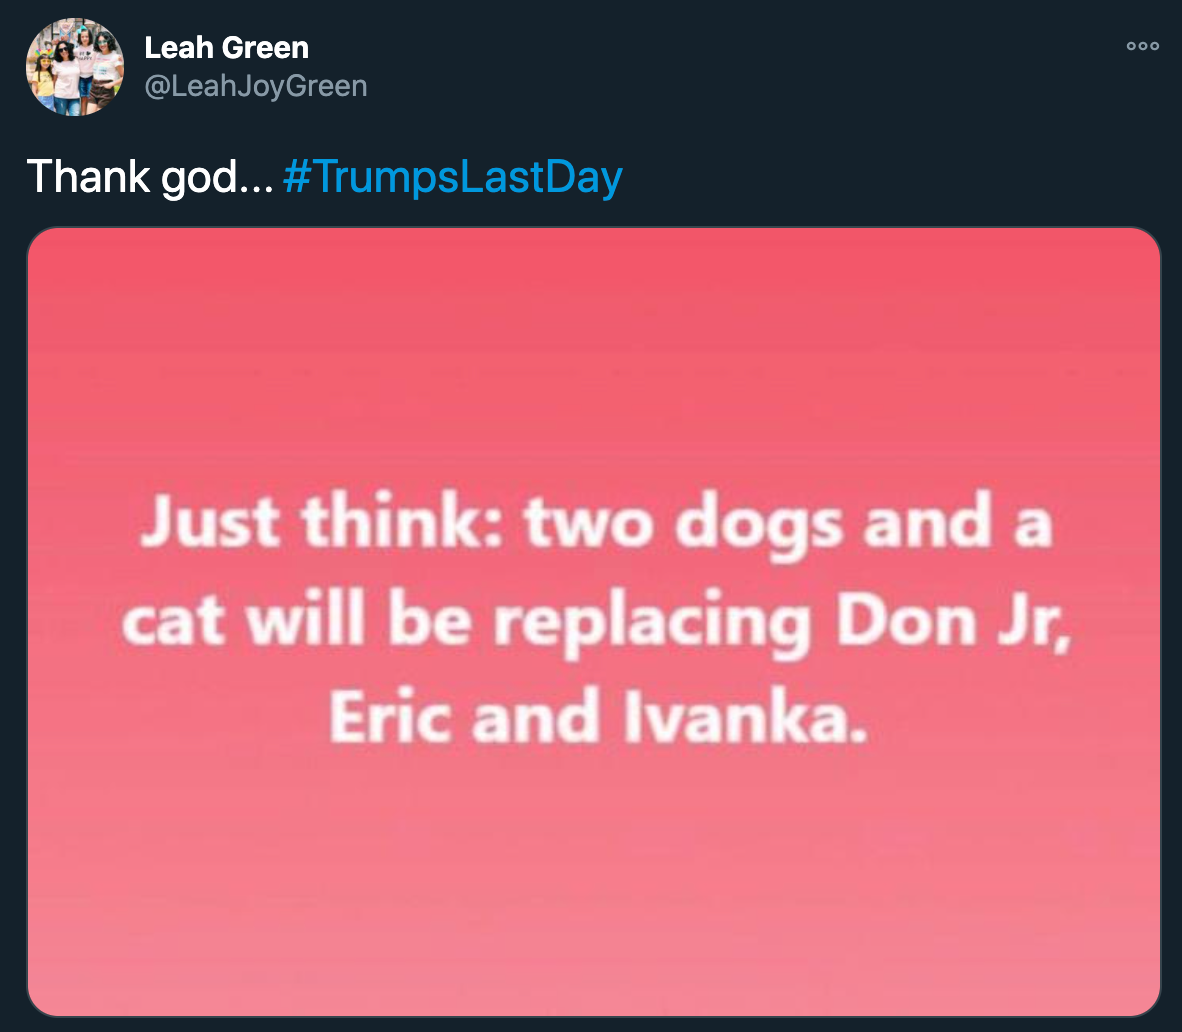 joe biden inauguration jokes - just think two dogs and a cat will be replacing don junior eric and ivanka